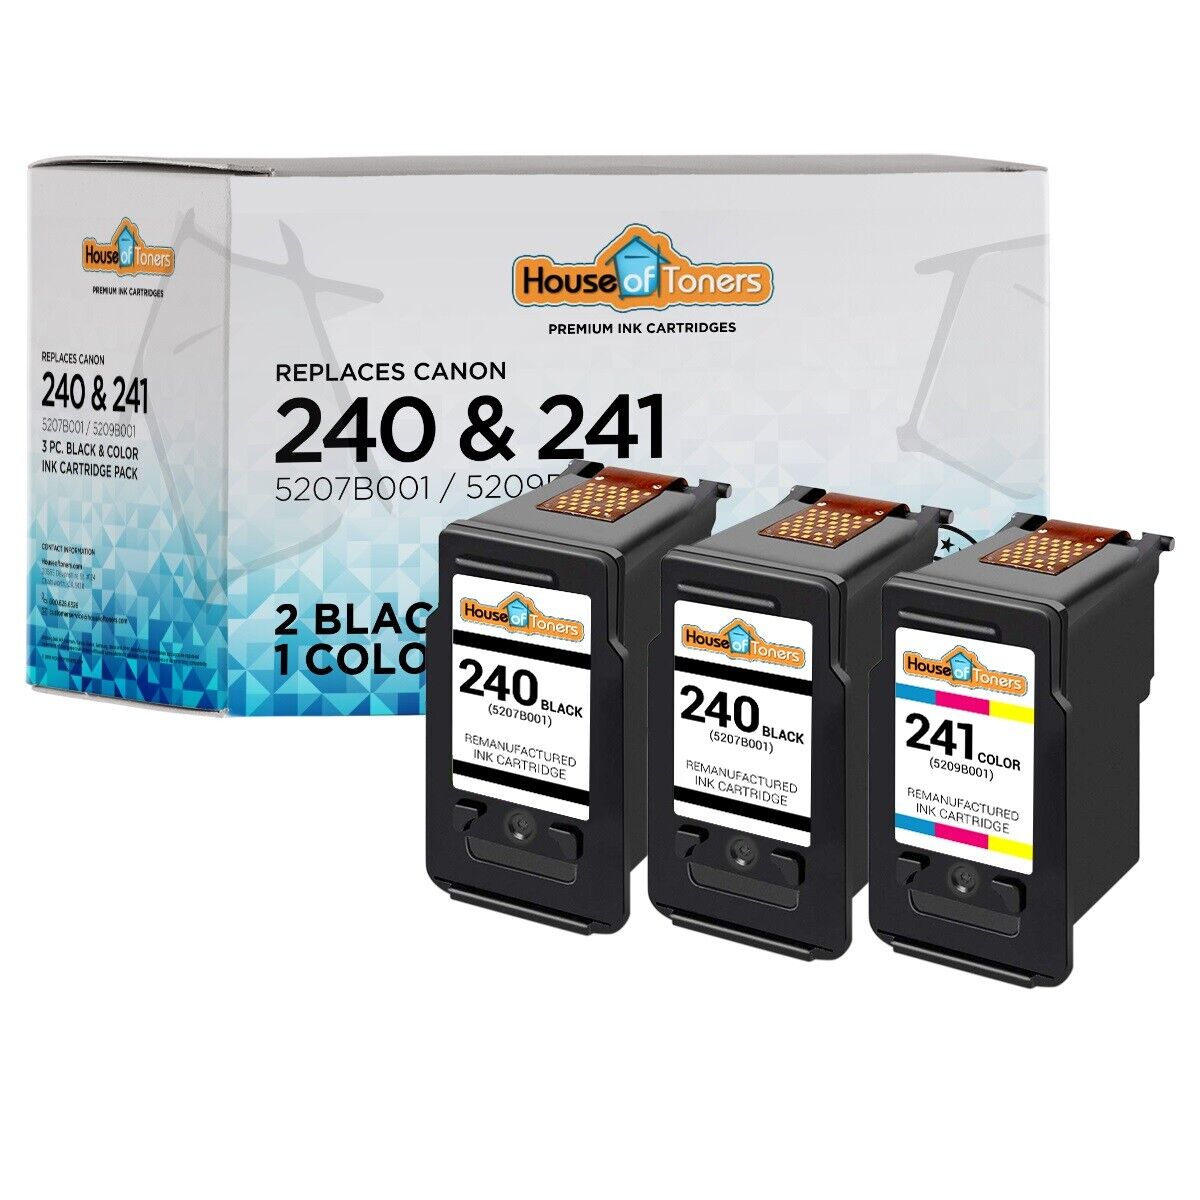 3-pk PG-240 CL-241 Ink Cartridge for Canon PIXMA MG and MX Series